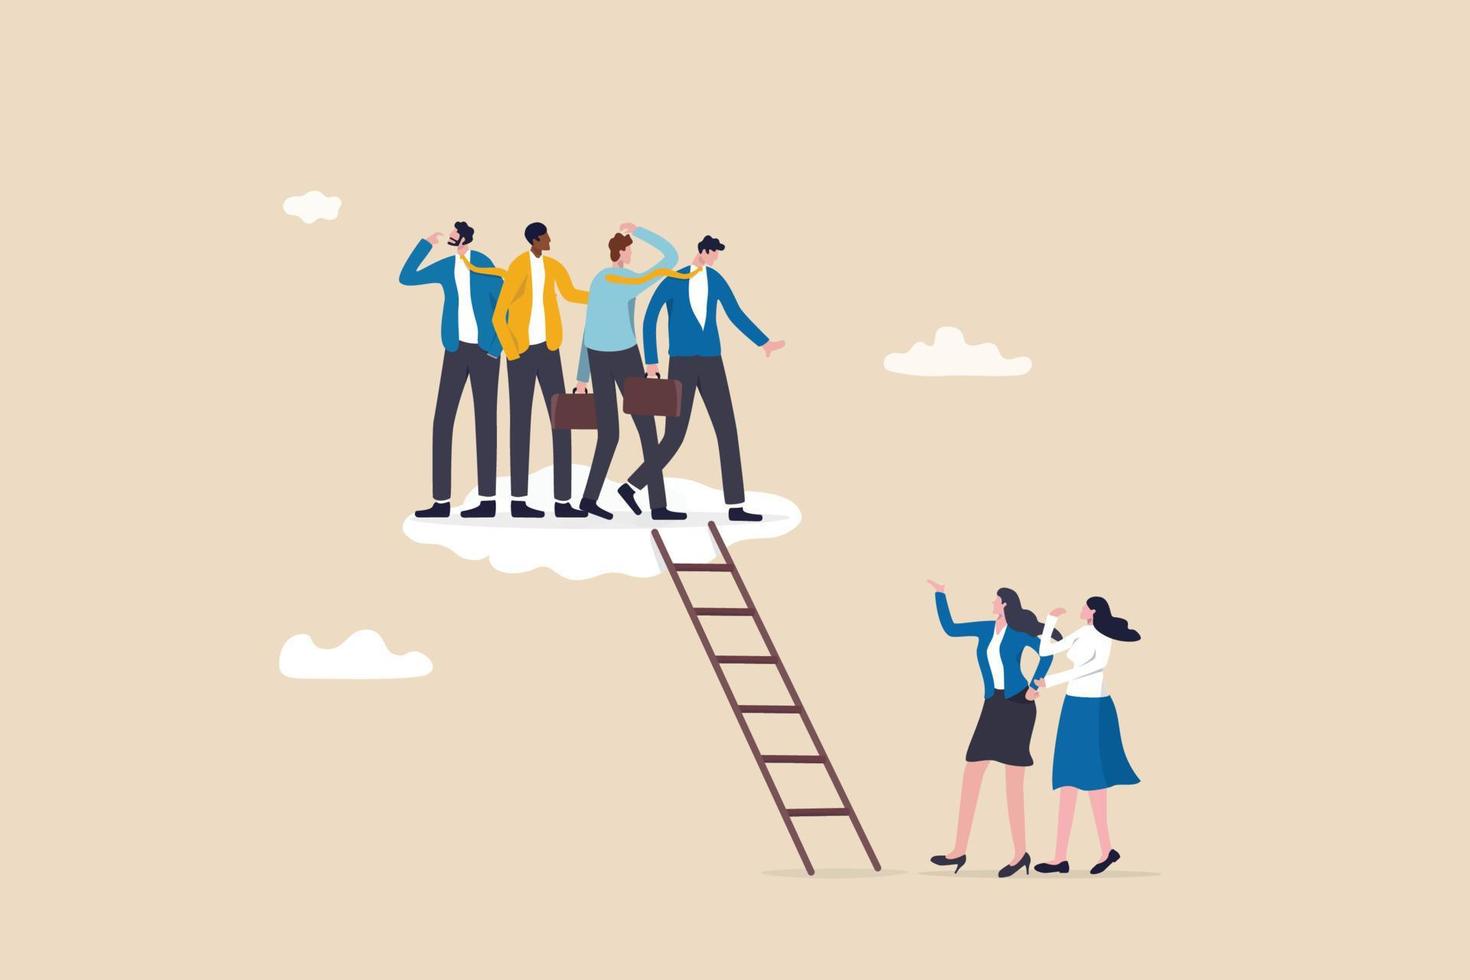 Gender gap, male domination in company executive board, unequal or unfair, inequality in management position, businessmen climb up ladder up the cloud with no space left for woman female colleagues. vector